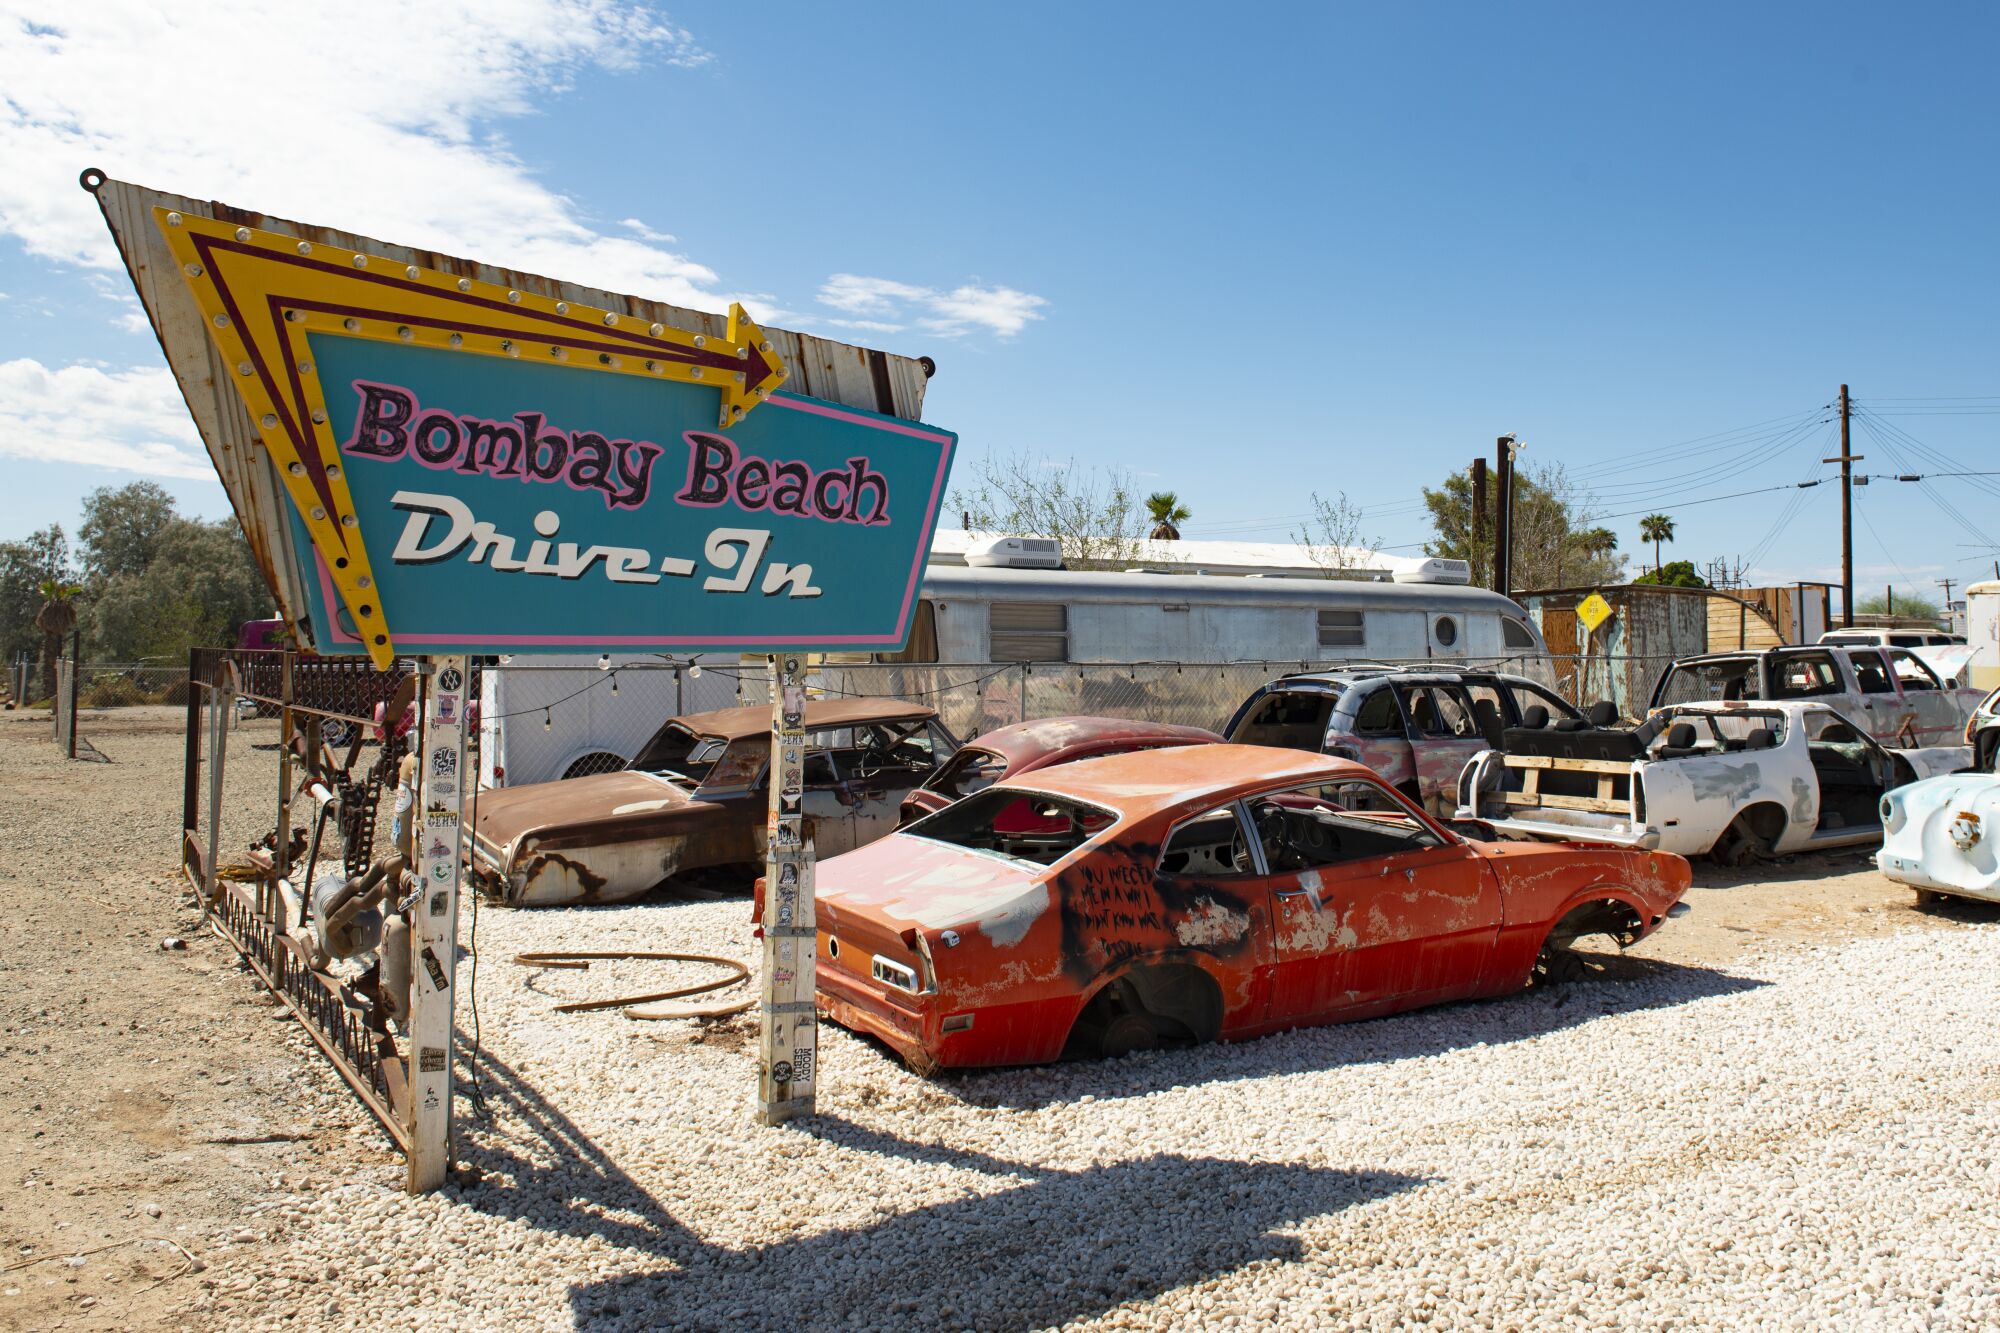 A sign that reads "Bombay Beach Drive-In" towers over dilapidated cars in a lot.